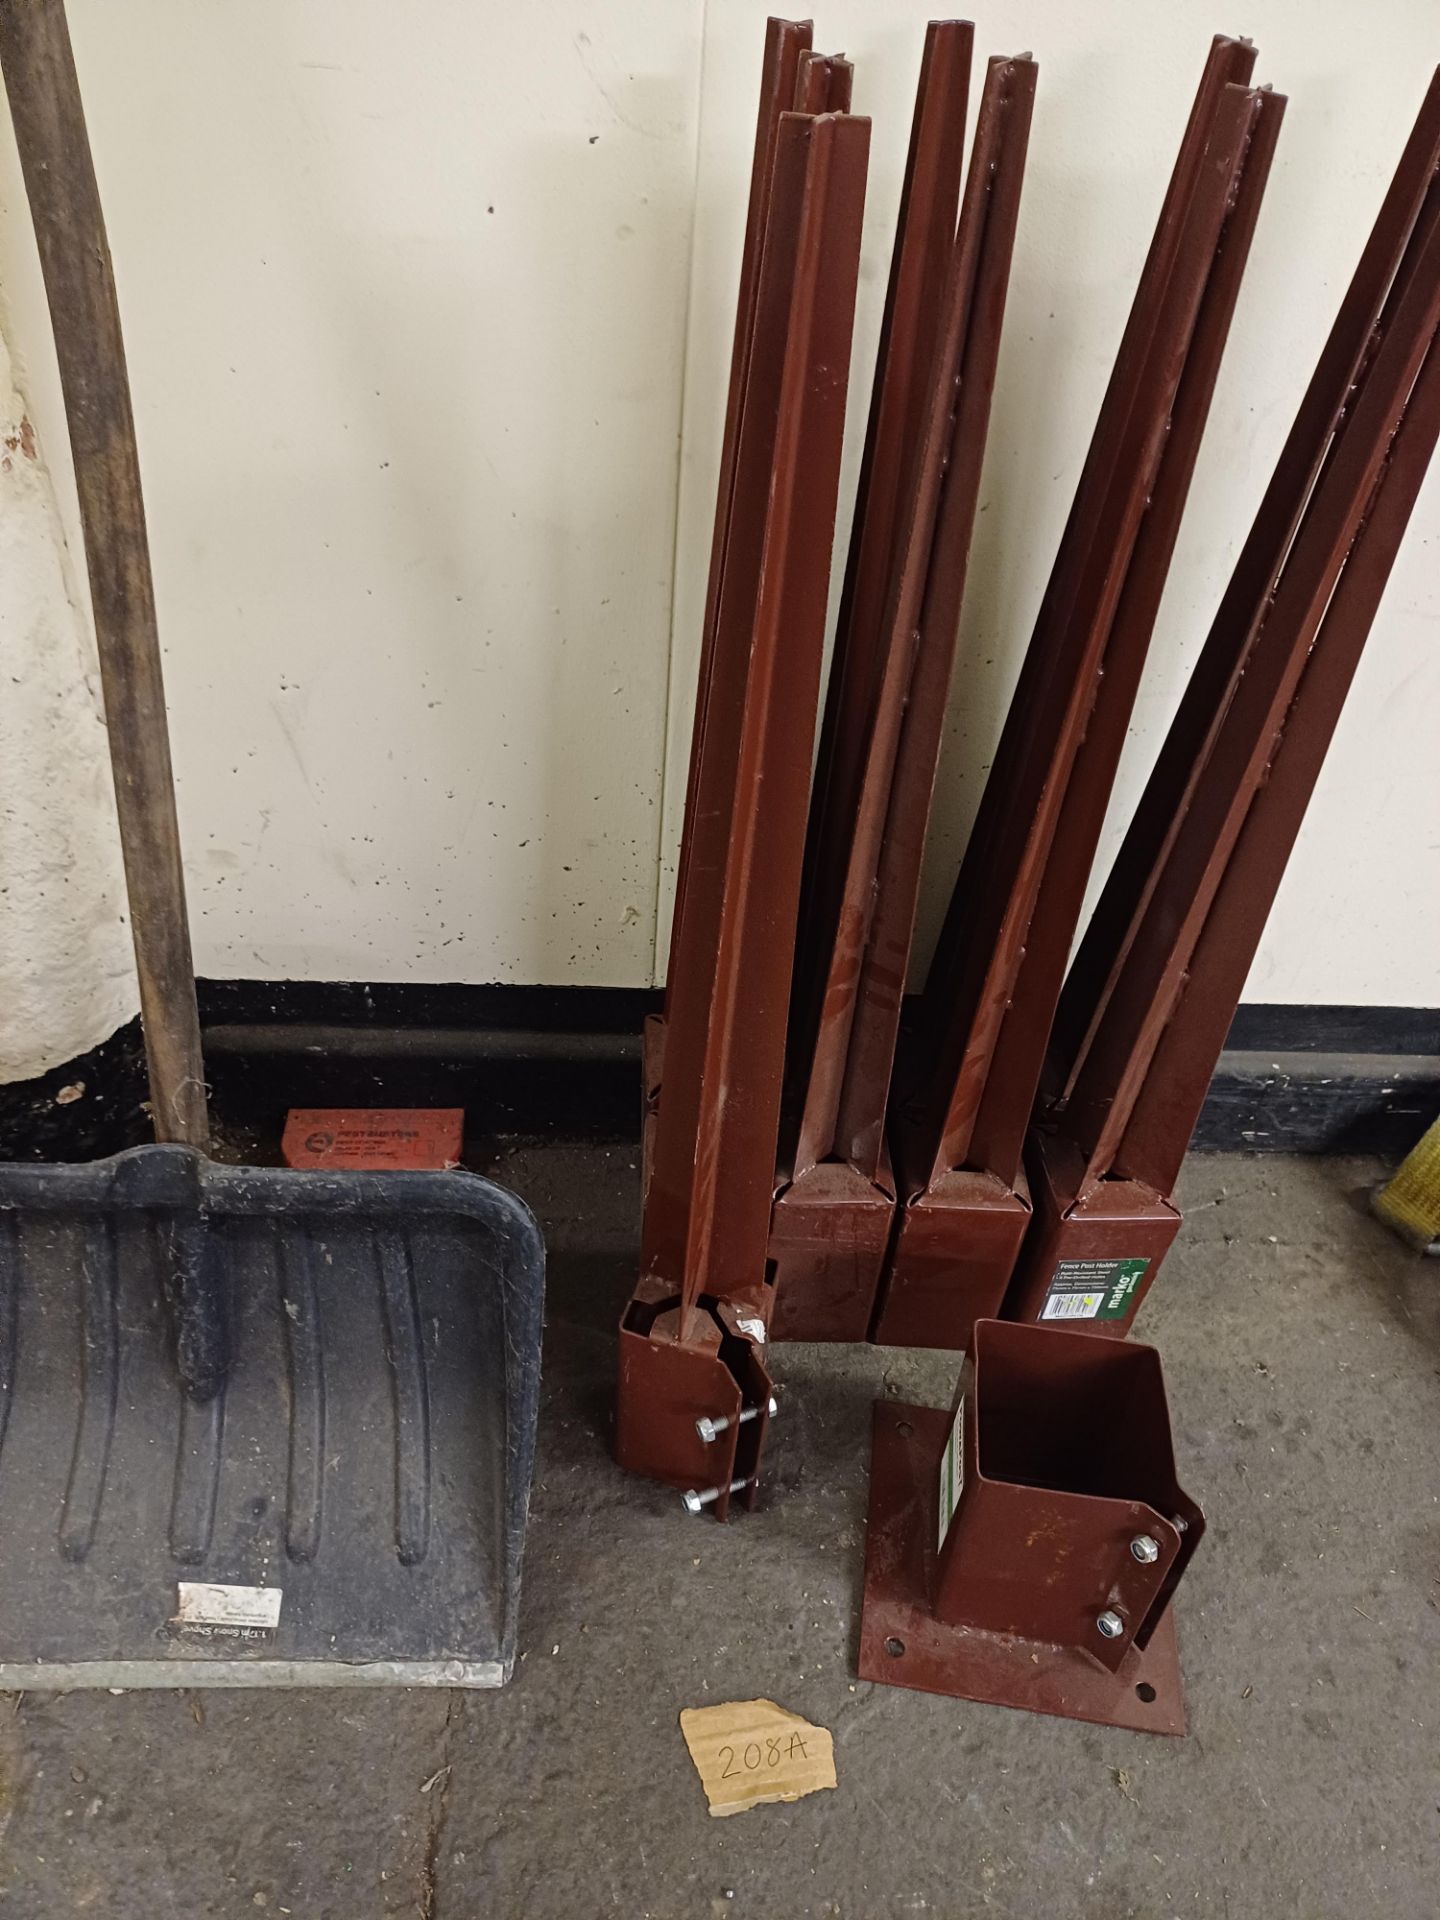 6: Fence Post Holders Marko 75mmx75mmx750mm with Shovel as shown in pictures - Image 2 of 4